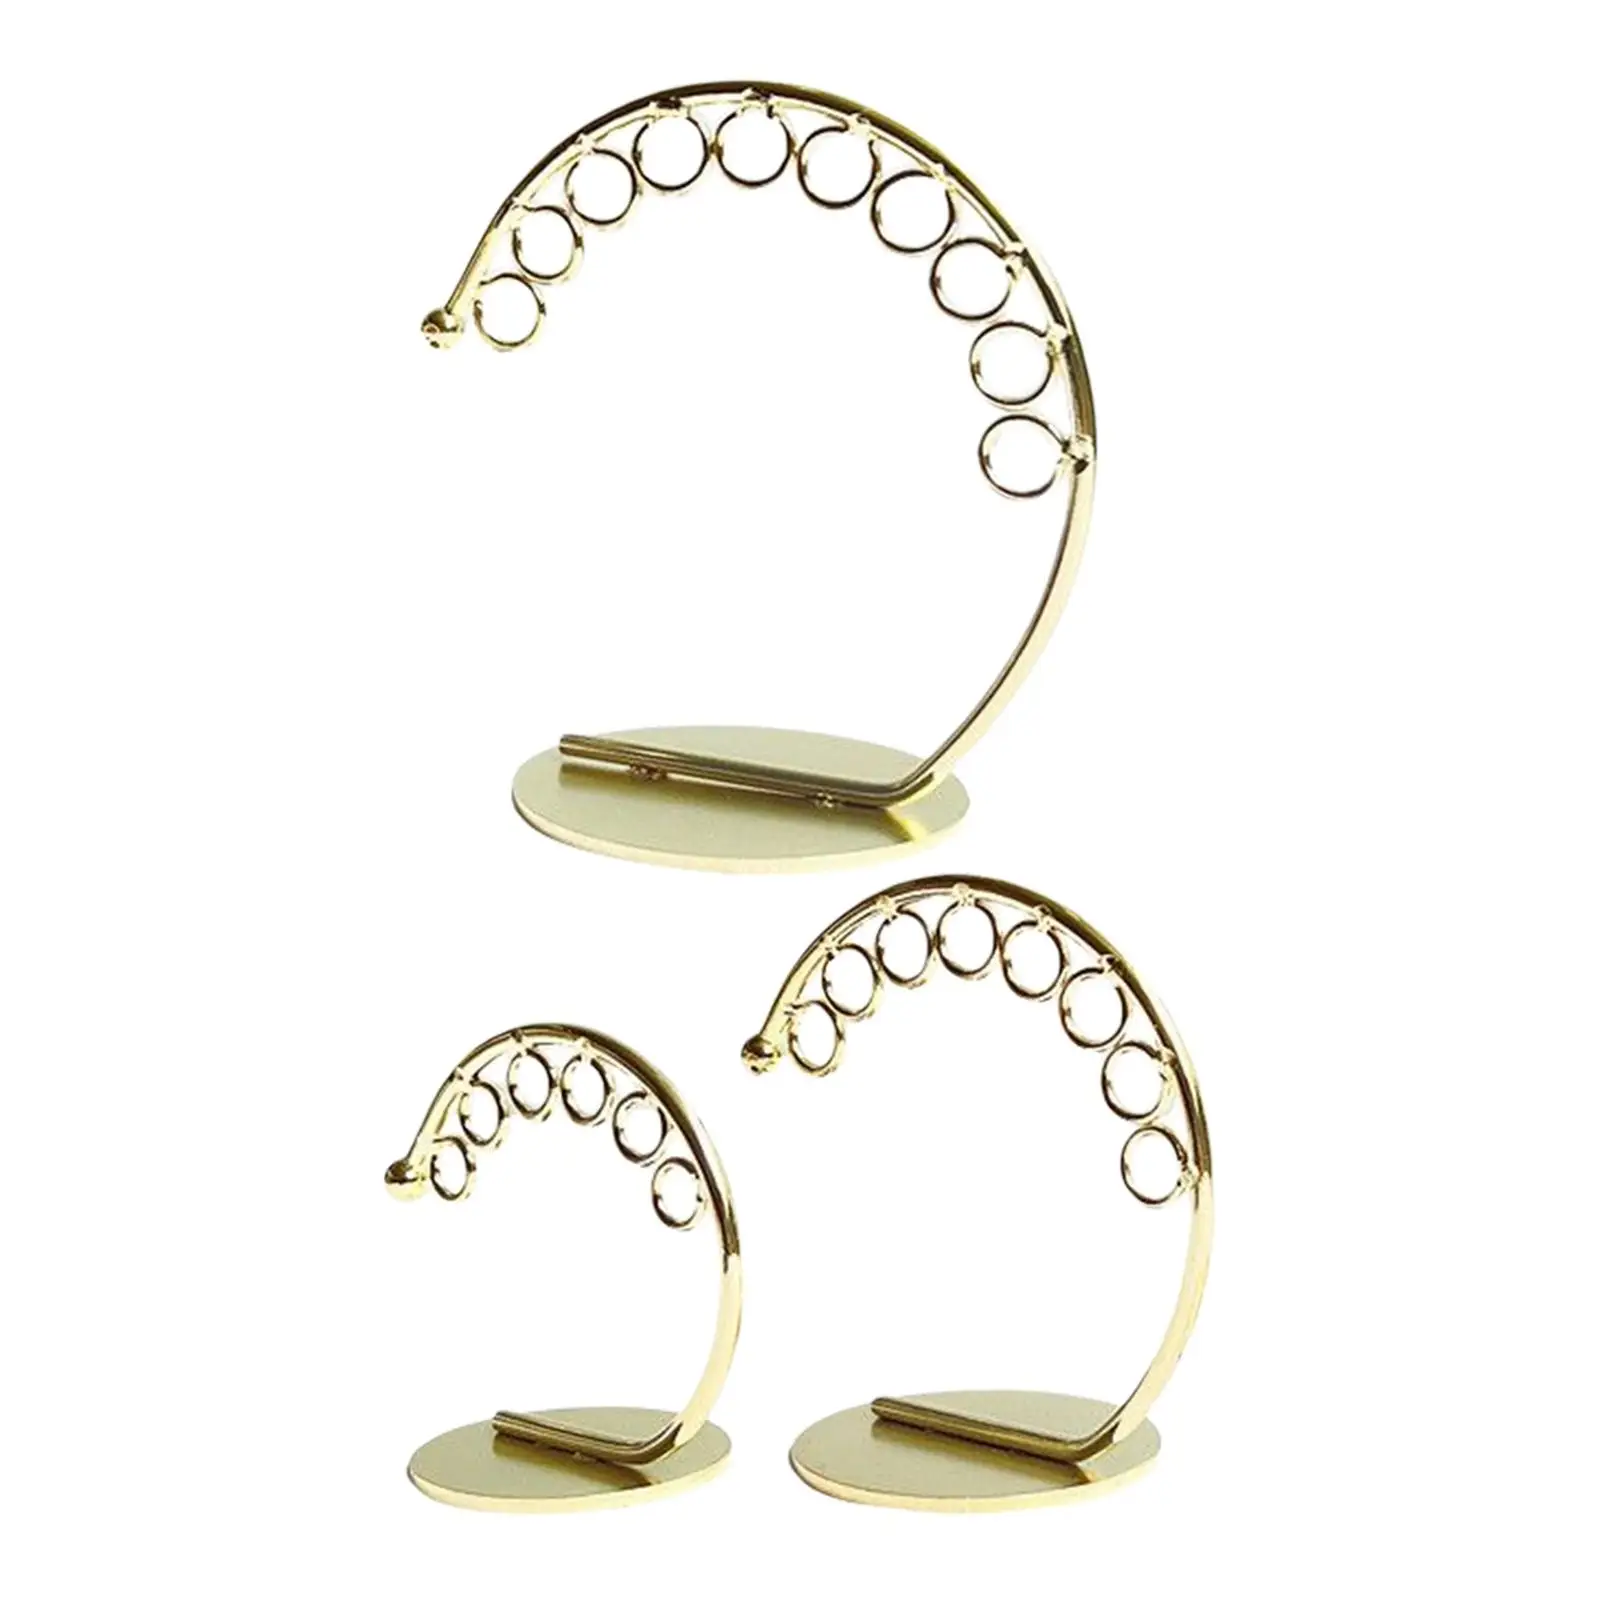 3Pcs Stud Earring Display Holder Earring Display Stand for Showroom Showcase Photography Props